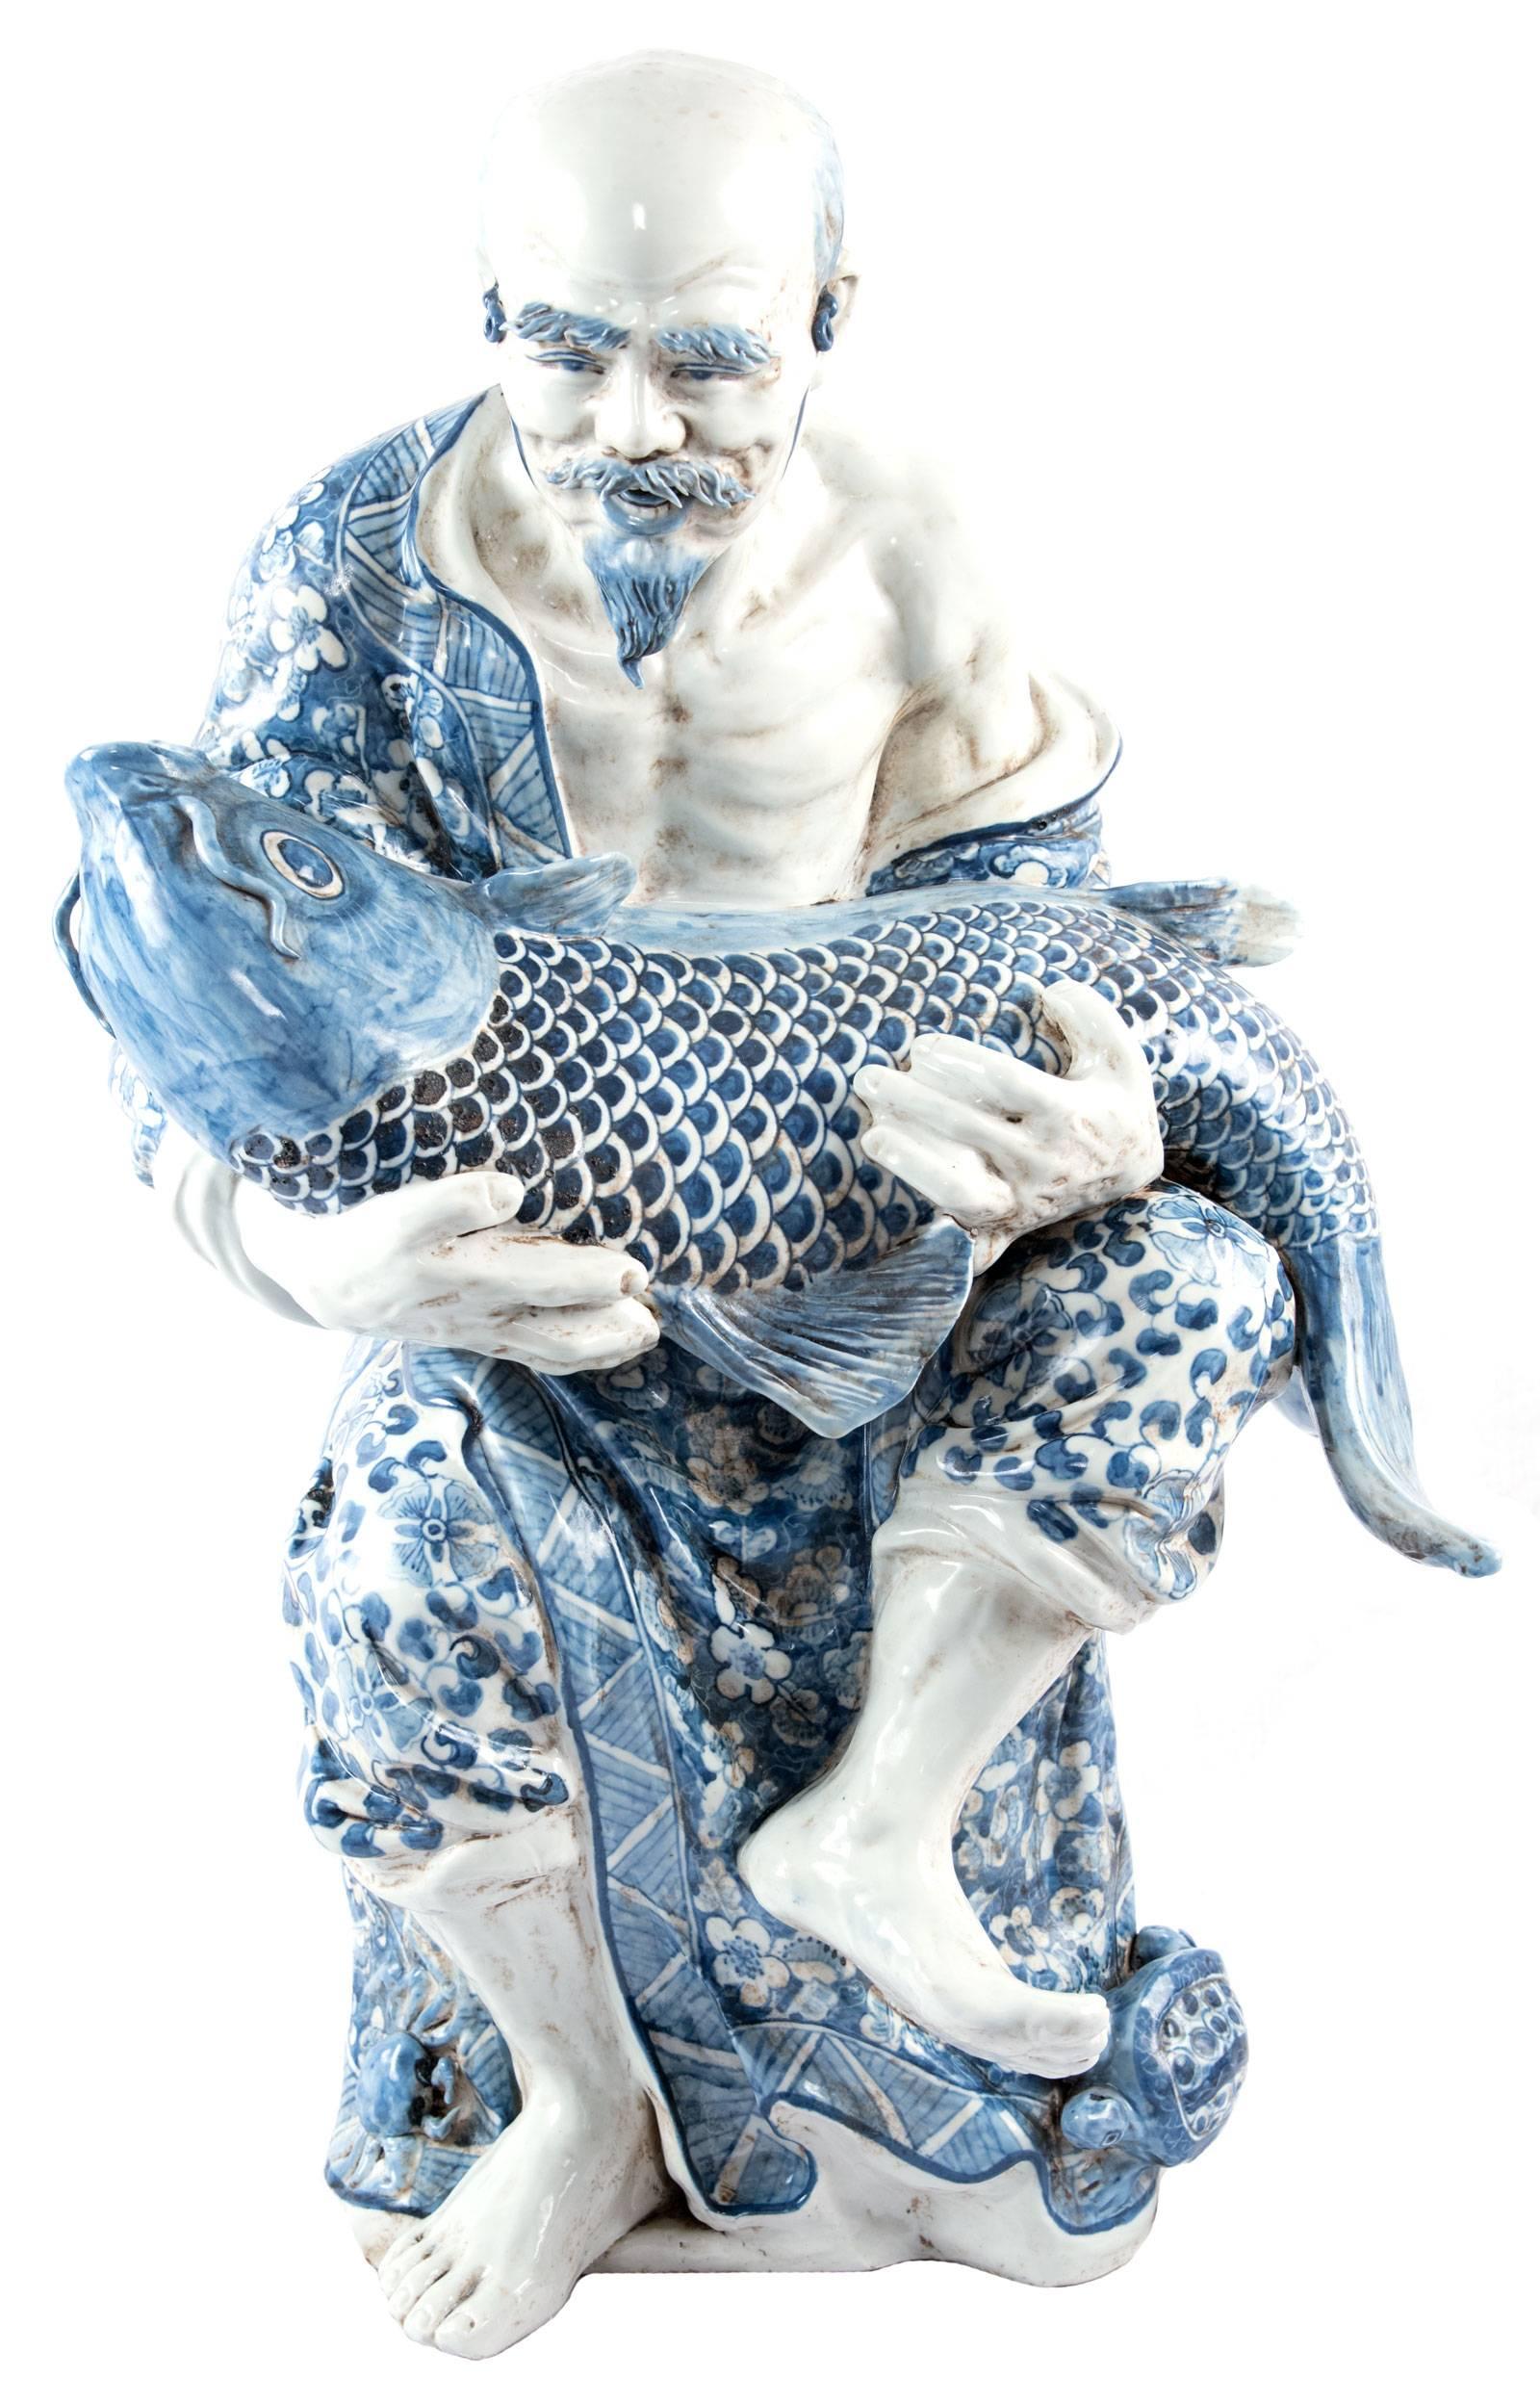 A blue and white painted porcelain figure of a man struggling to carry a large koi fish in his arms, his beautifully decorated robe falling from his shoulder and his facial expression shaped with the effort. Dimensions: 27 x 16.5 x 9.5 in.